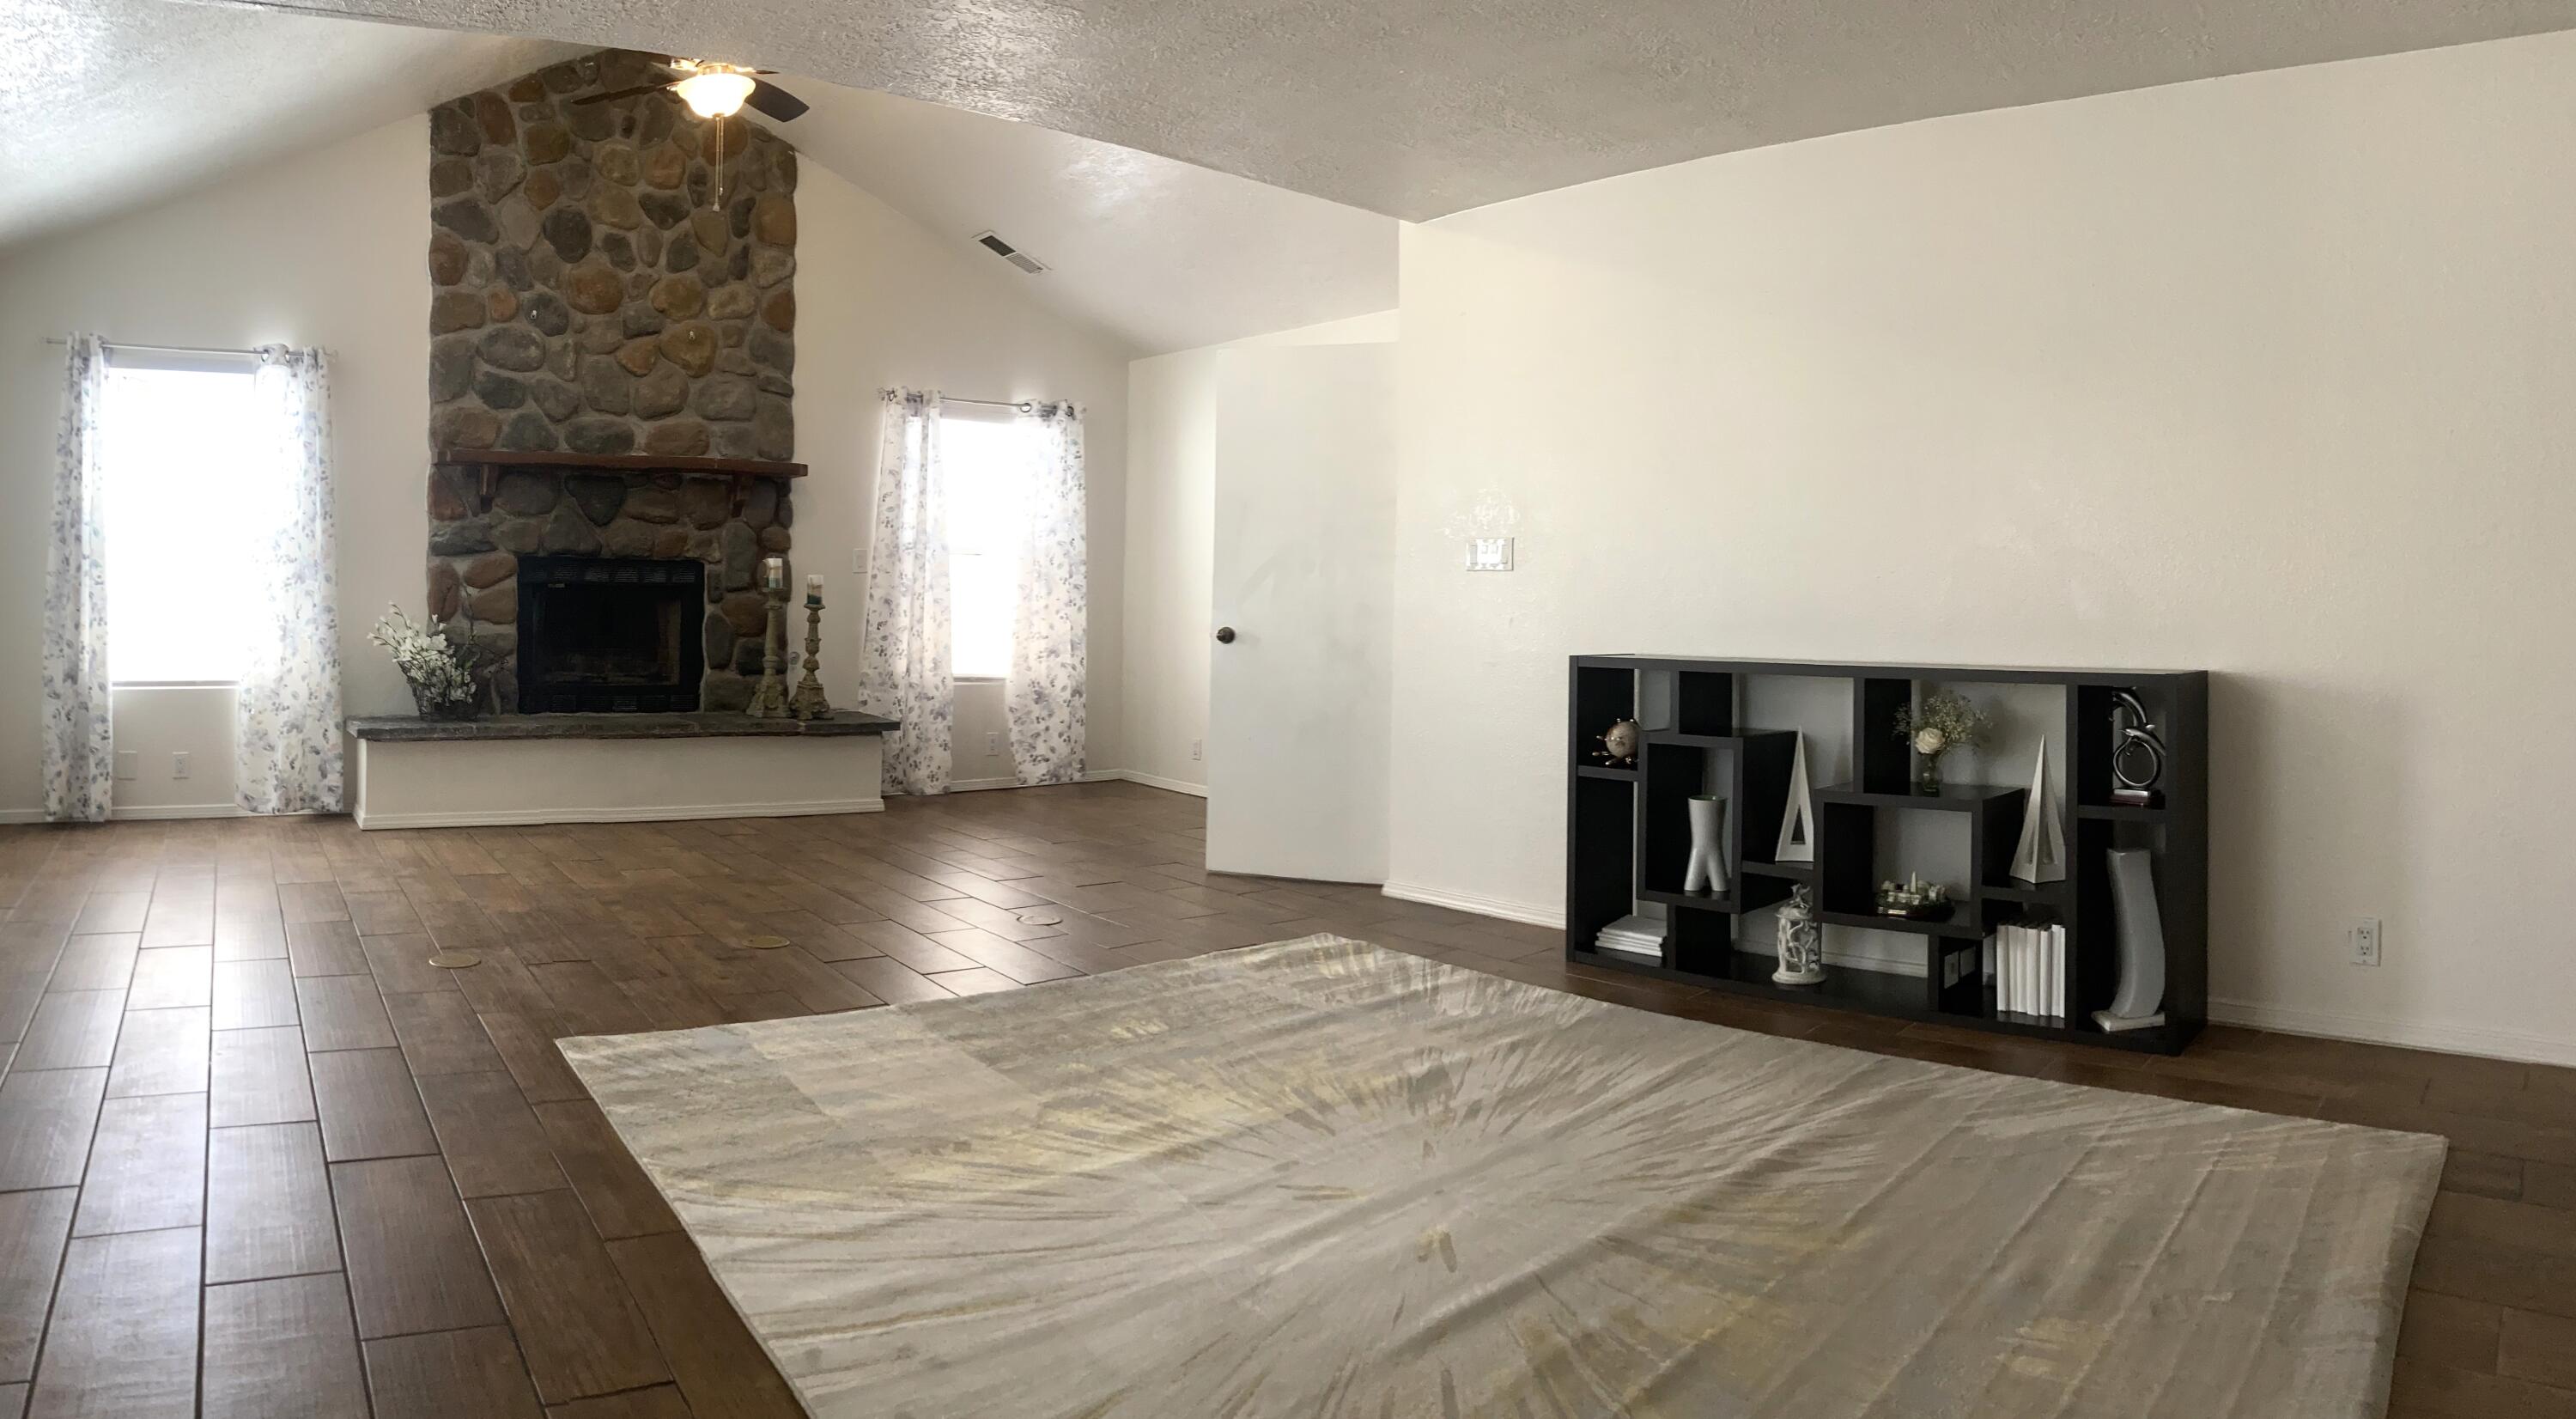 1600 Rosewood Avenue NW, Albuquerque, New Mexico 87120, 3 Bedrooms Bedrooms, ,3 BathroomsBathrooms,Residential,For Sale,1600 Rosewood Avenue NW,1058974